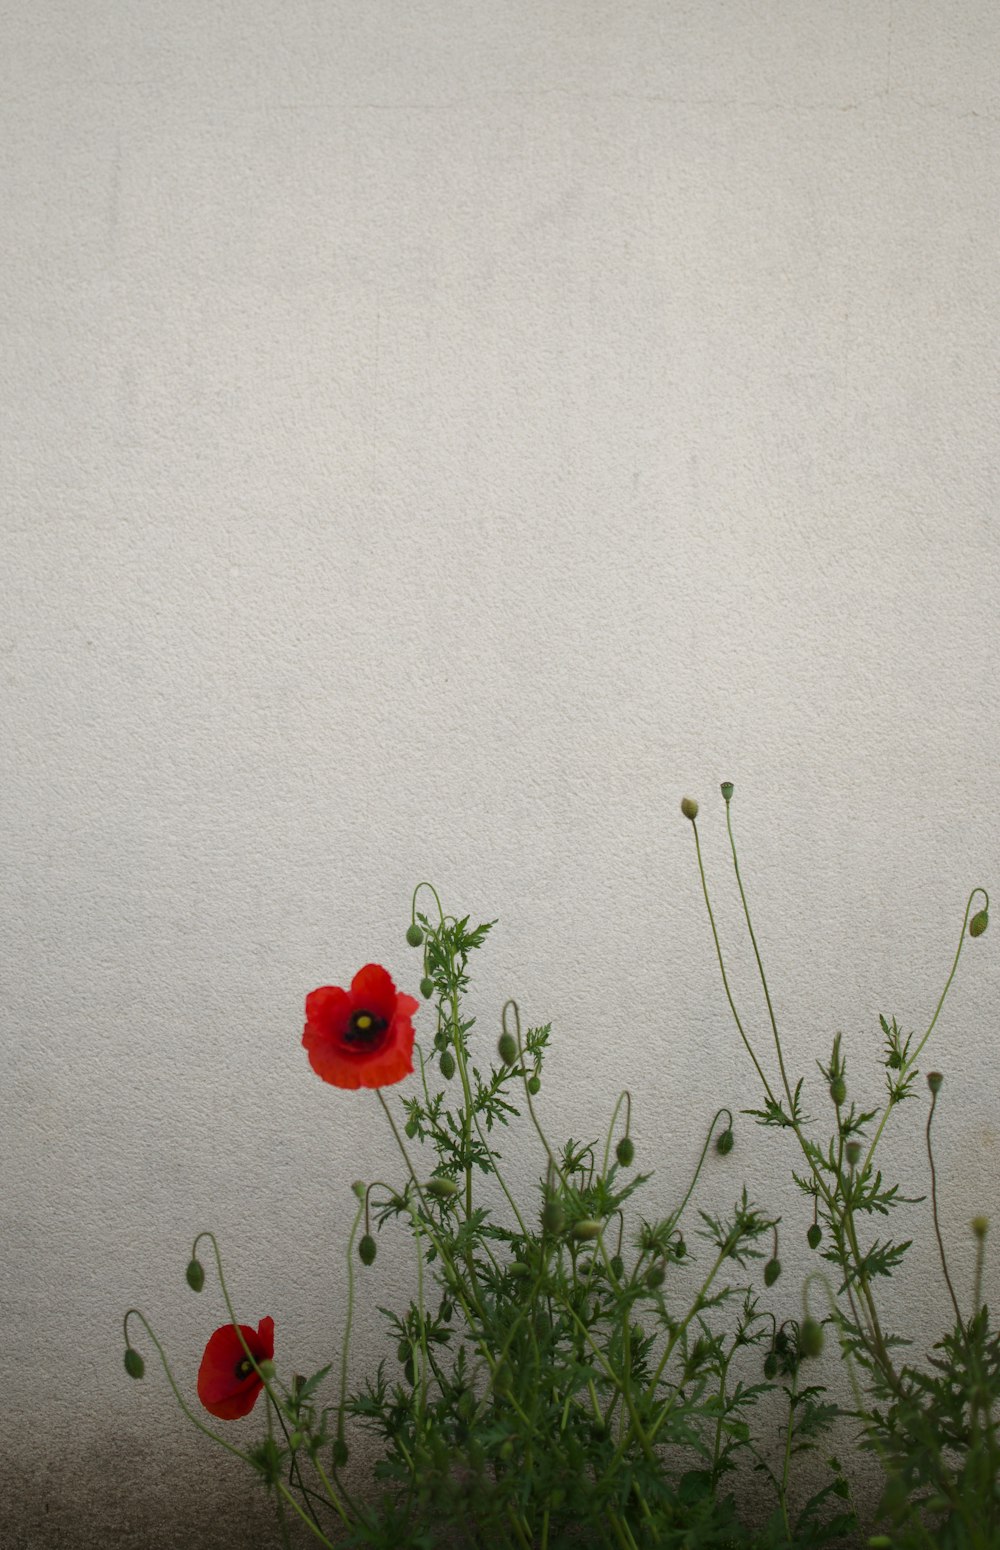 red rose in front of white wall